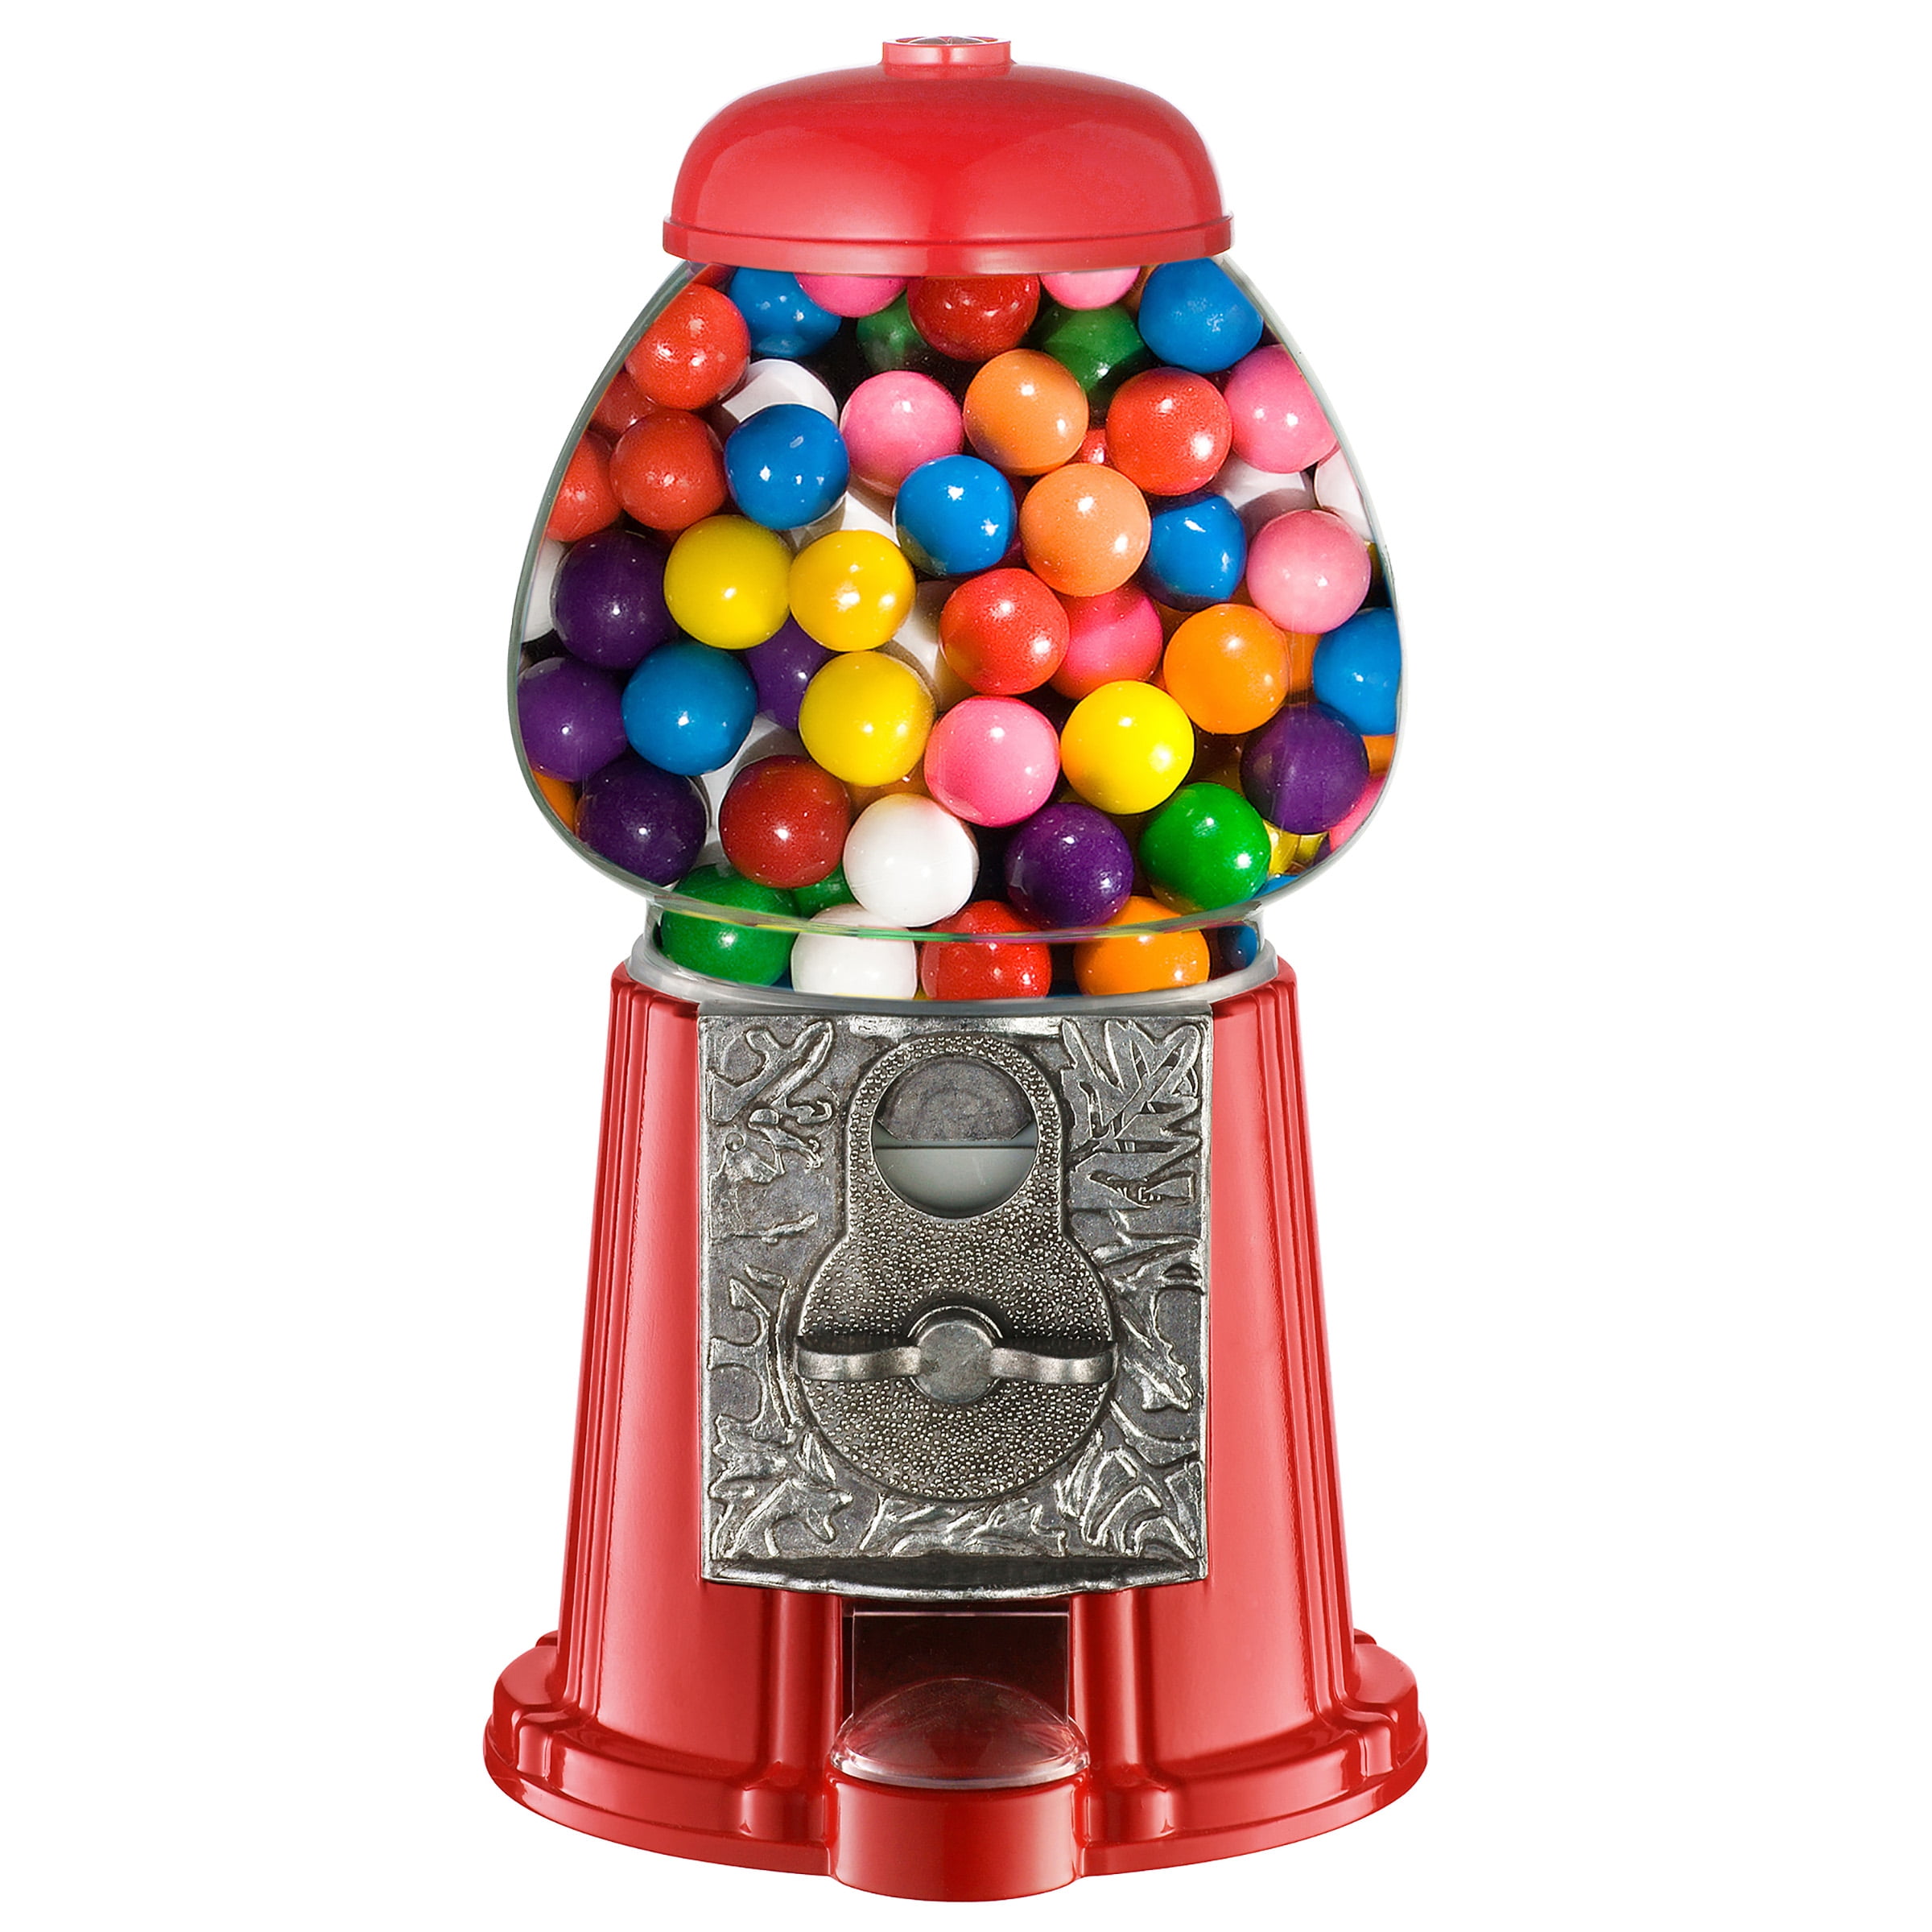 Vintage Gumball Machine Candy Vending With Stand Bubble Gum Dispenser Bank 